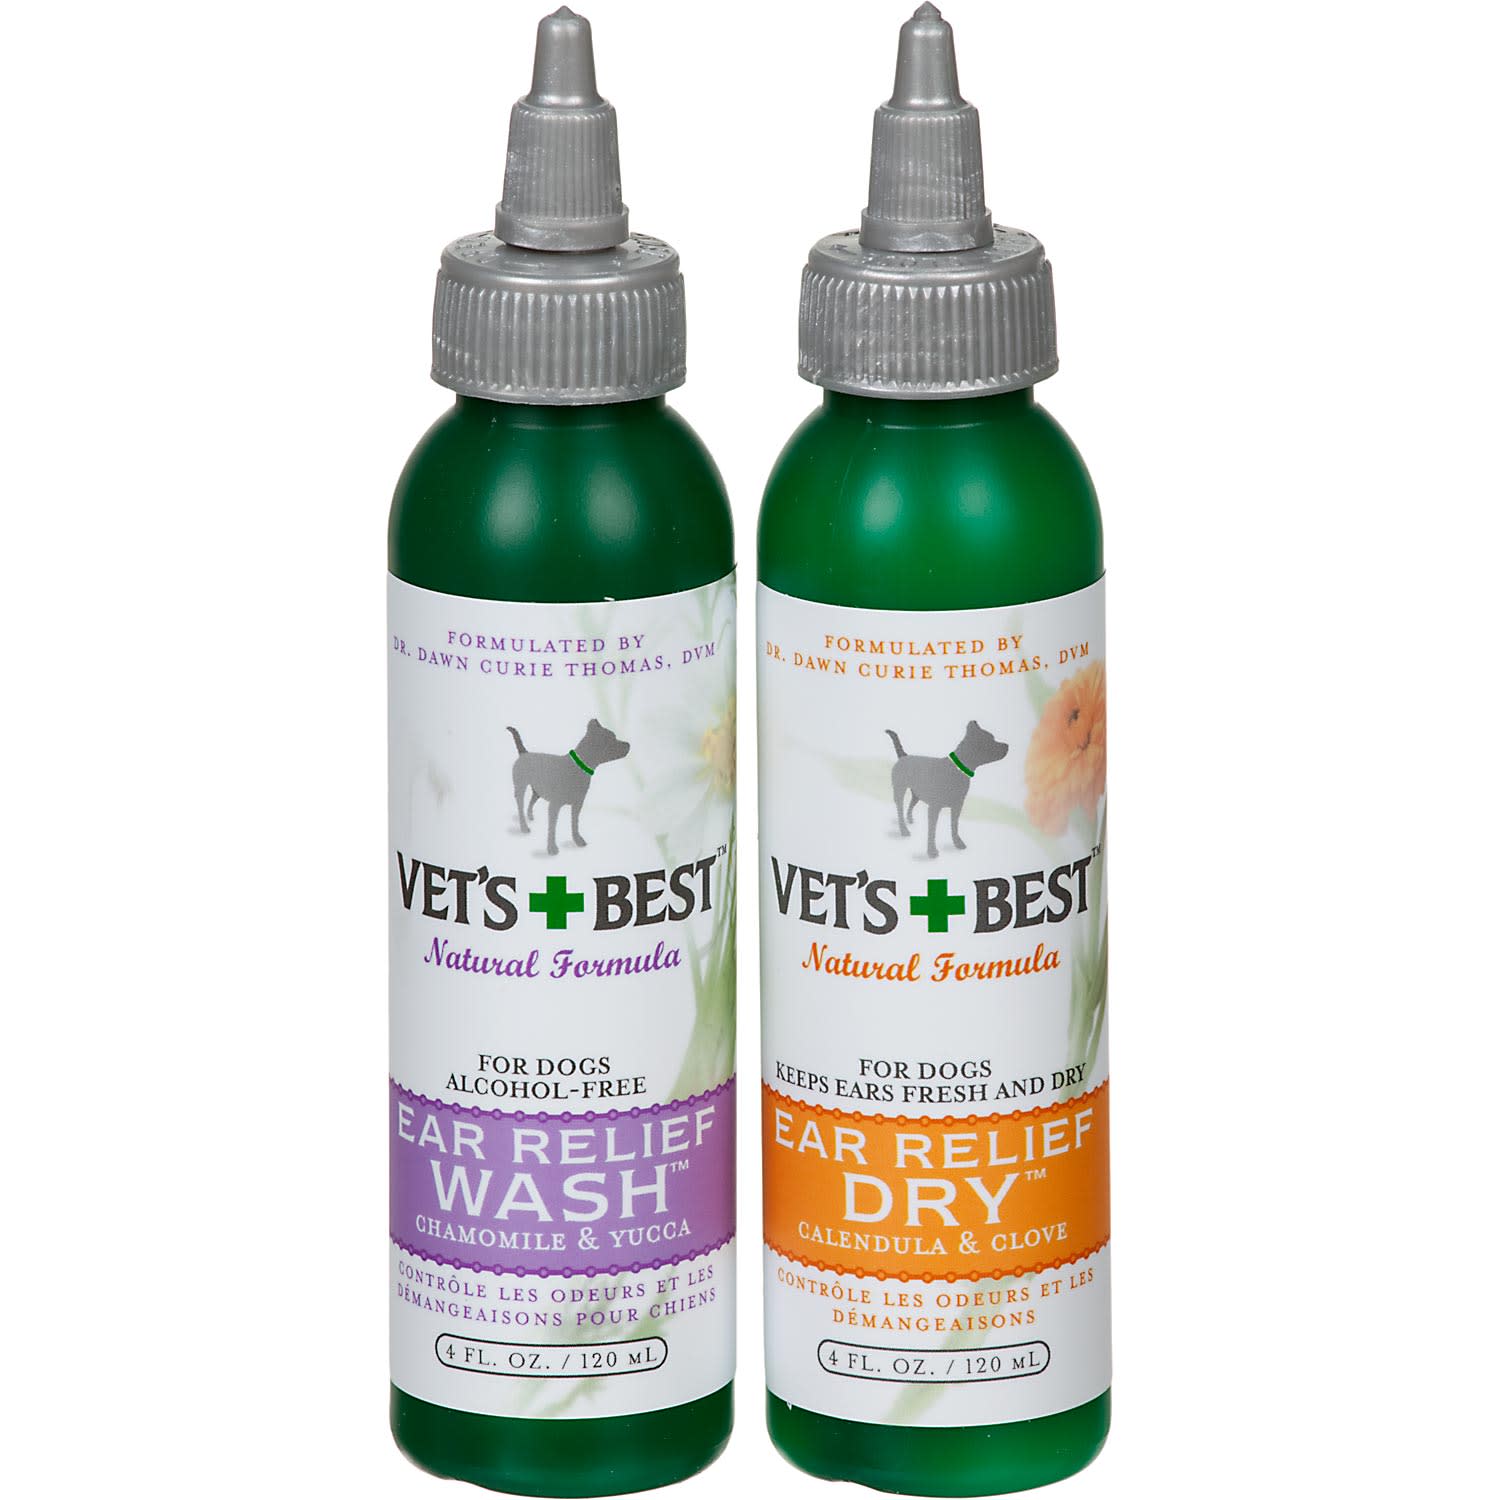 Vet's Best Ear Relief Wash \u0026 Dry for 